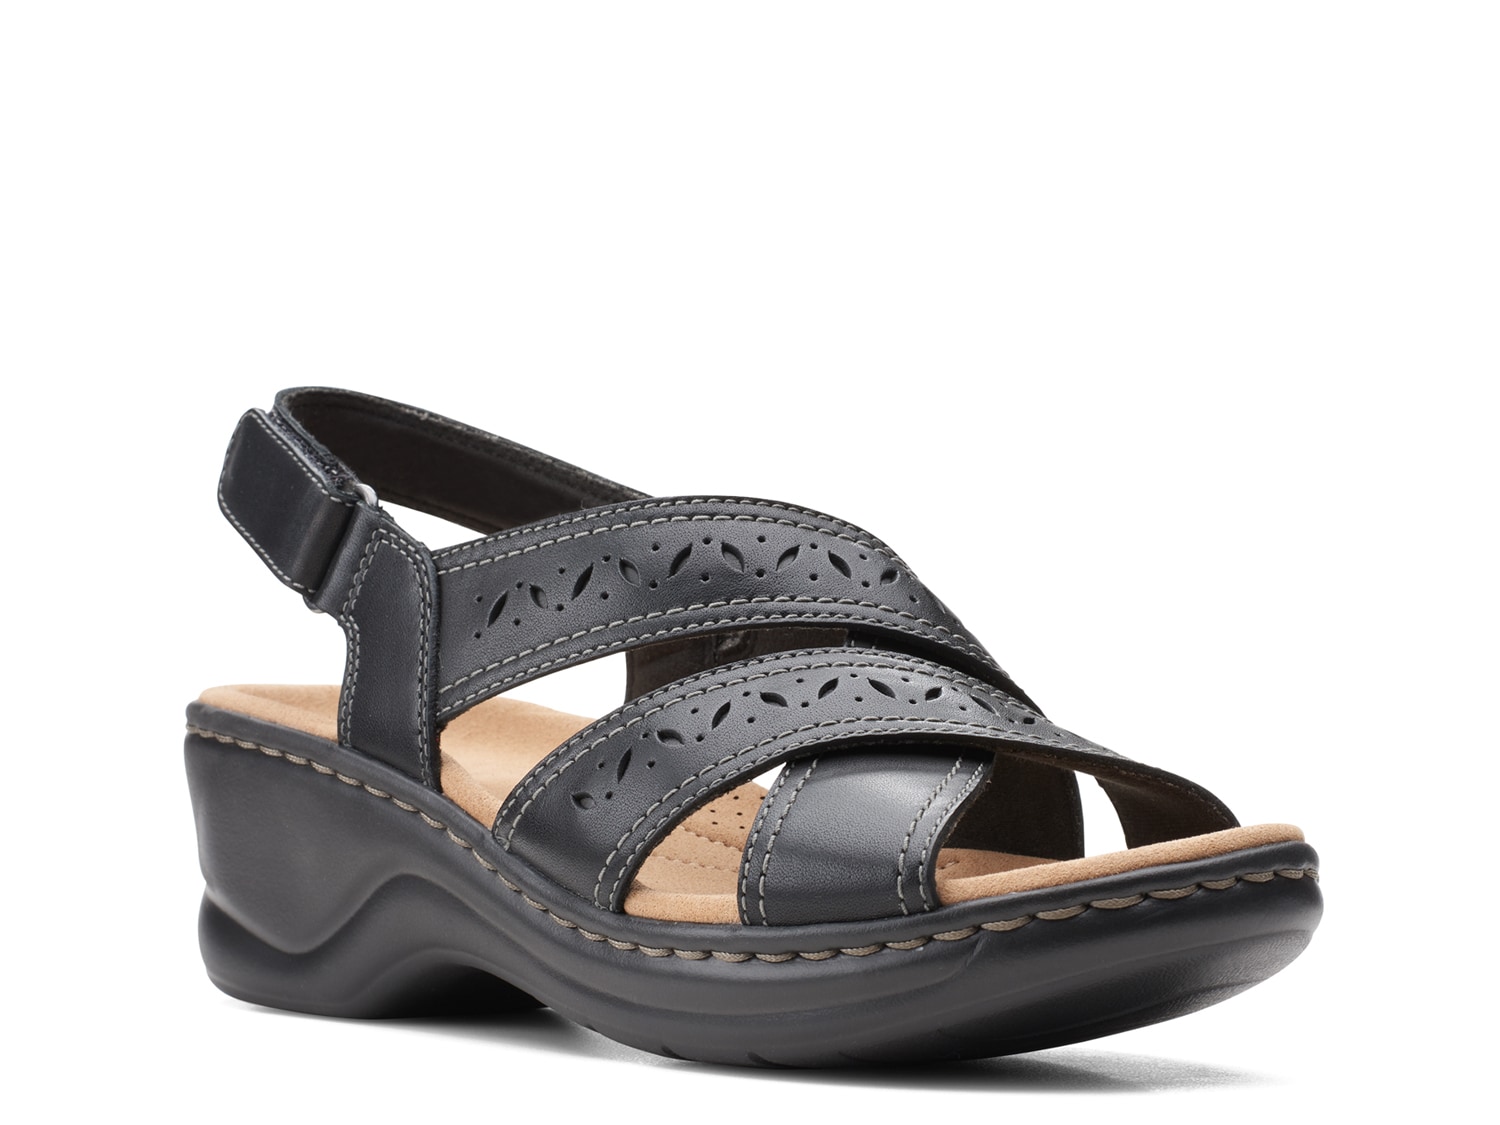 Clarks Lexi Pearl Sandal - Free Shipping | DSW